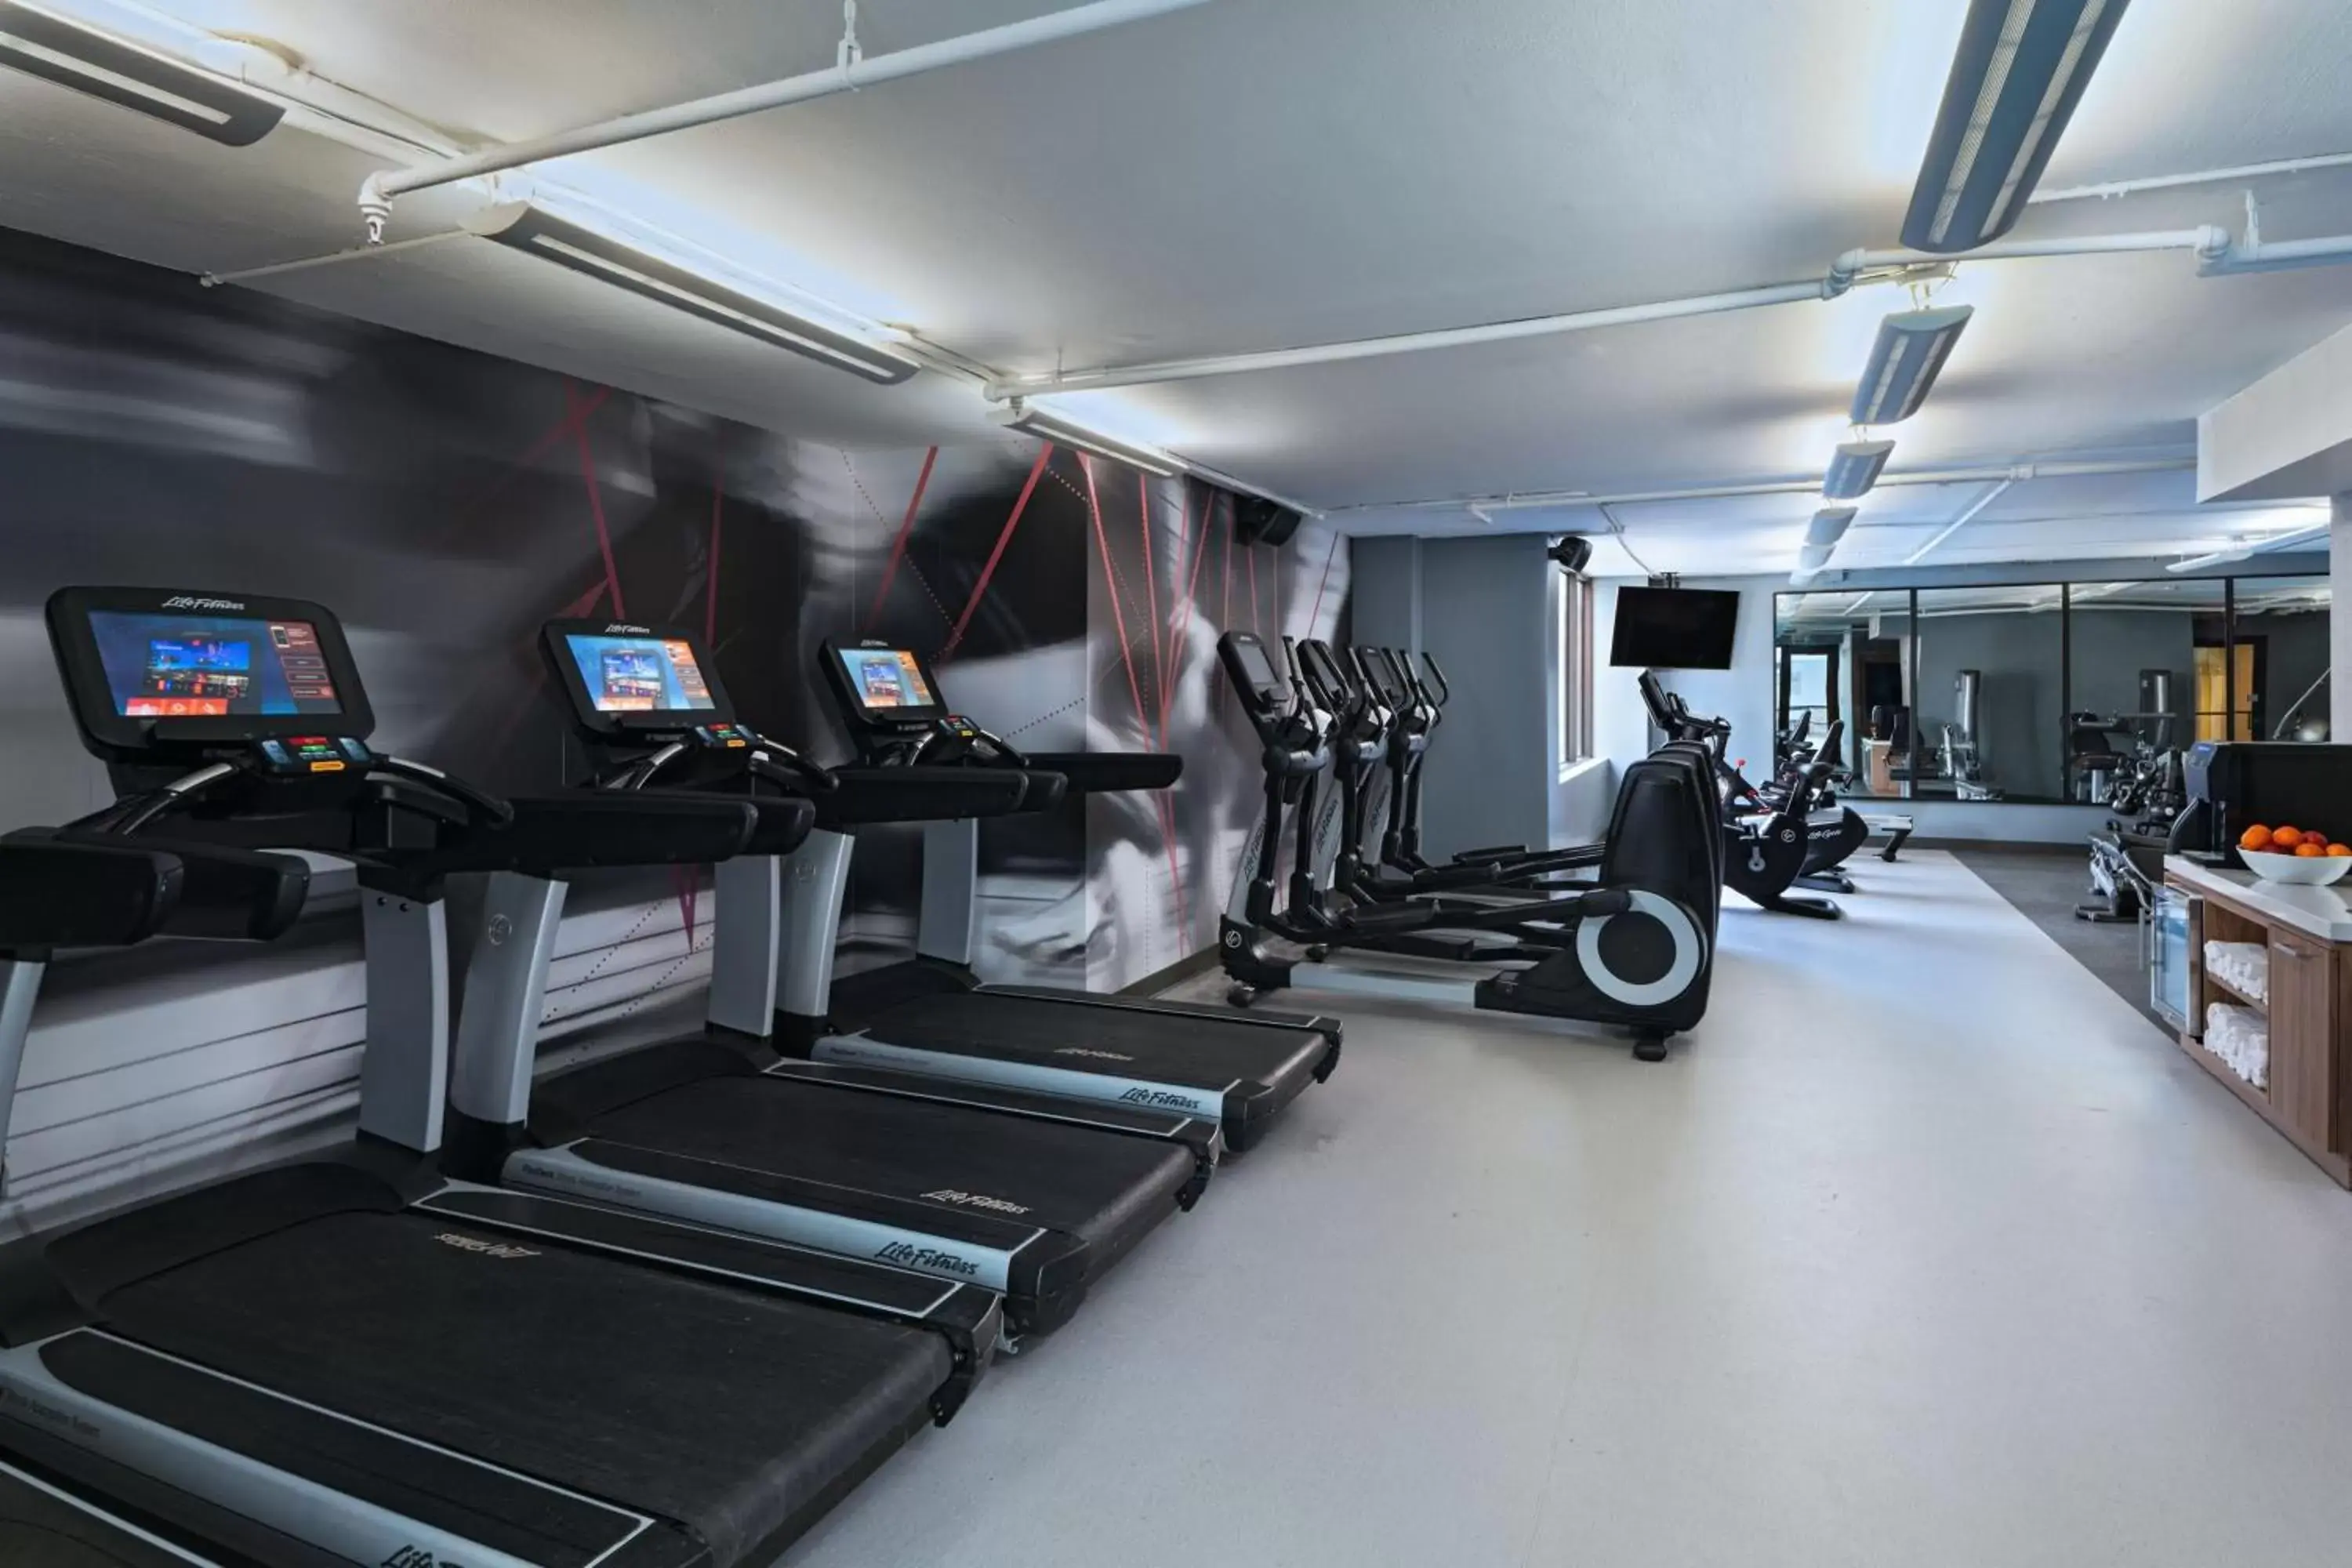 Fitness centre/facilities, Fitness Center/Facilities in Houston Marriott Medical Center/Museum District